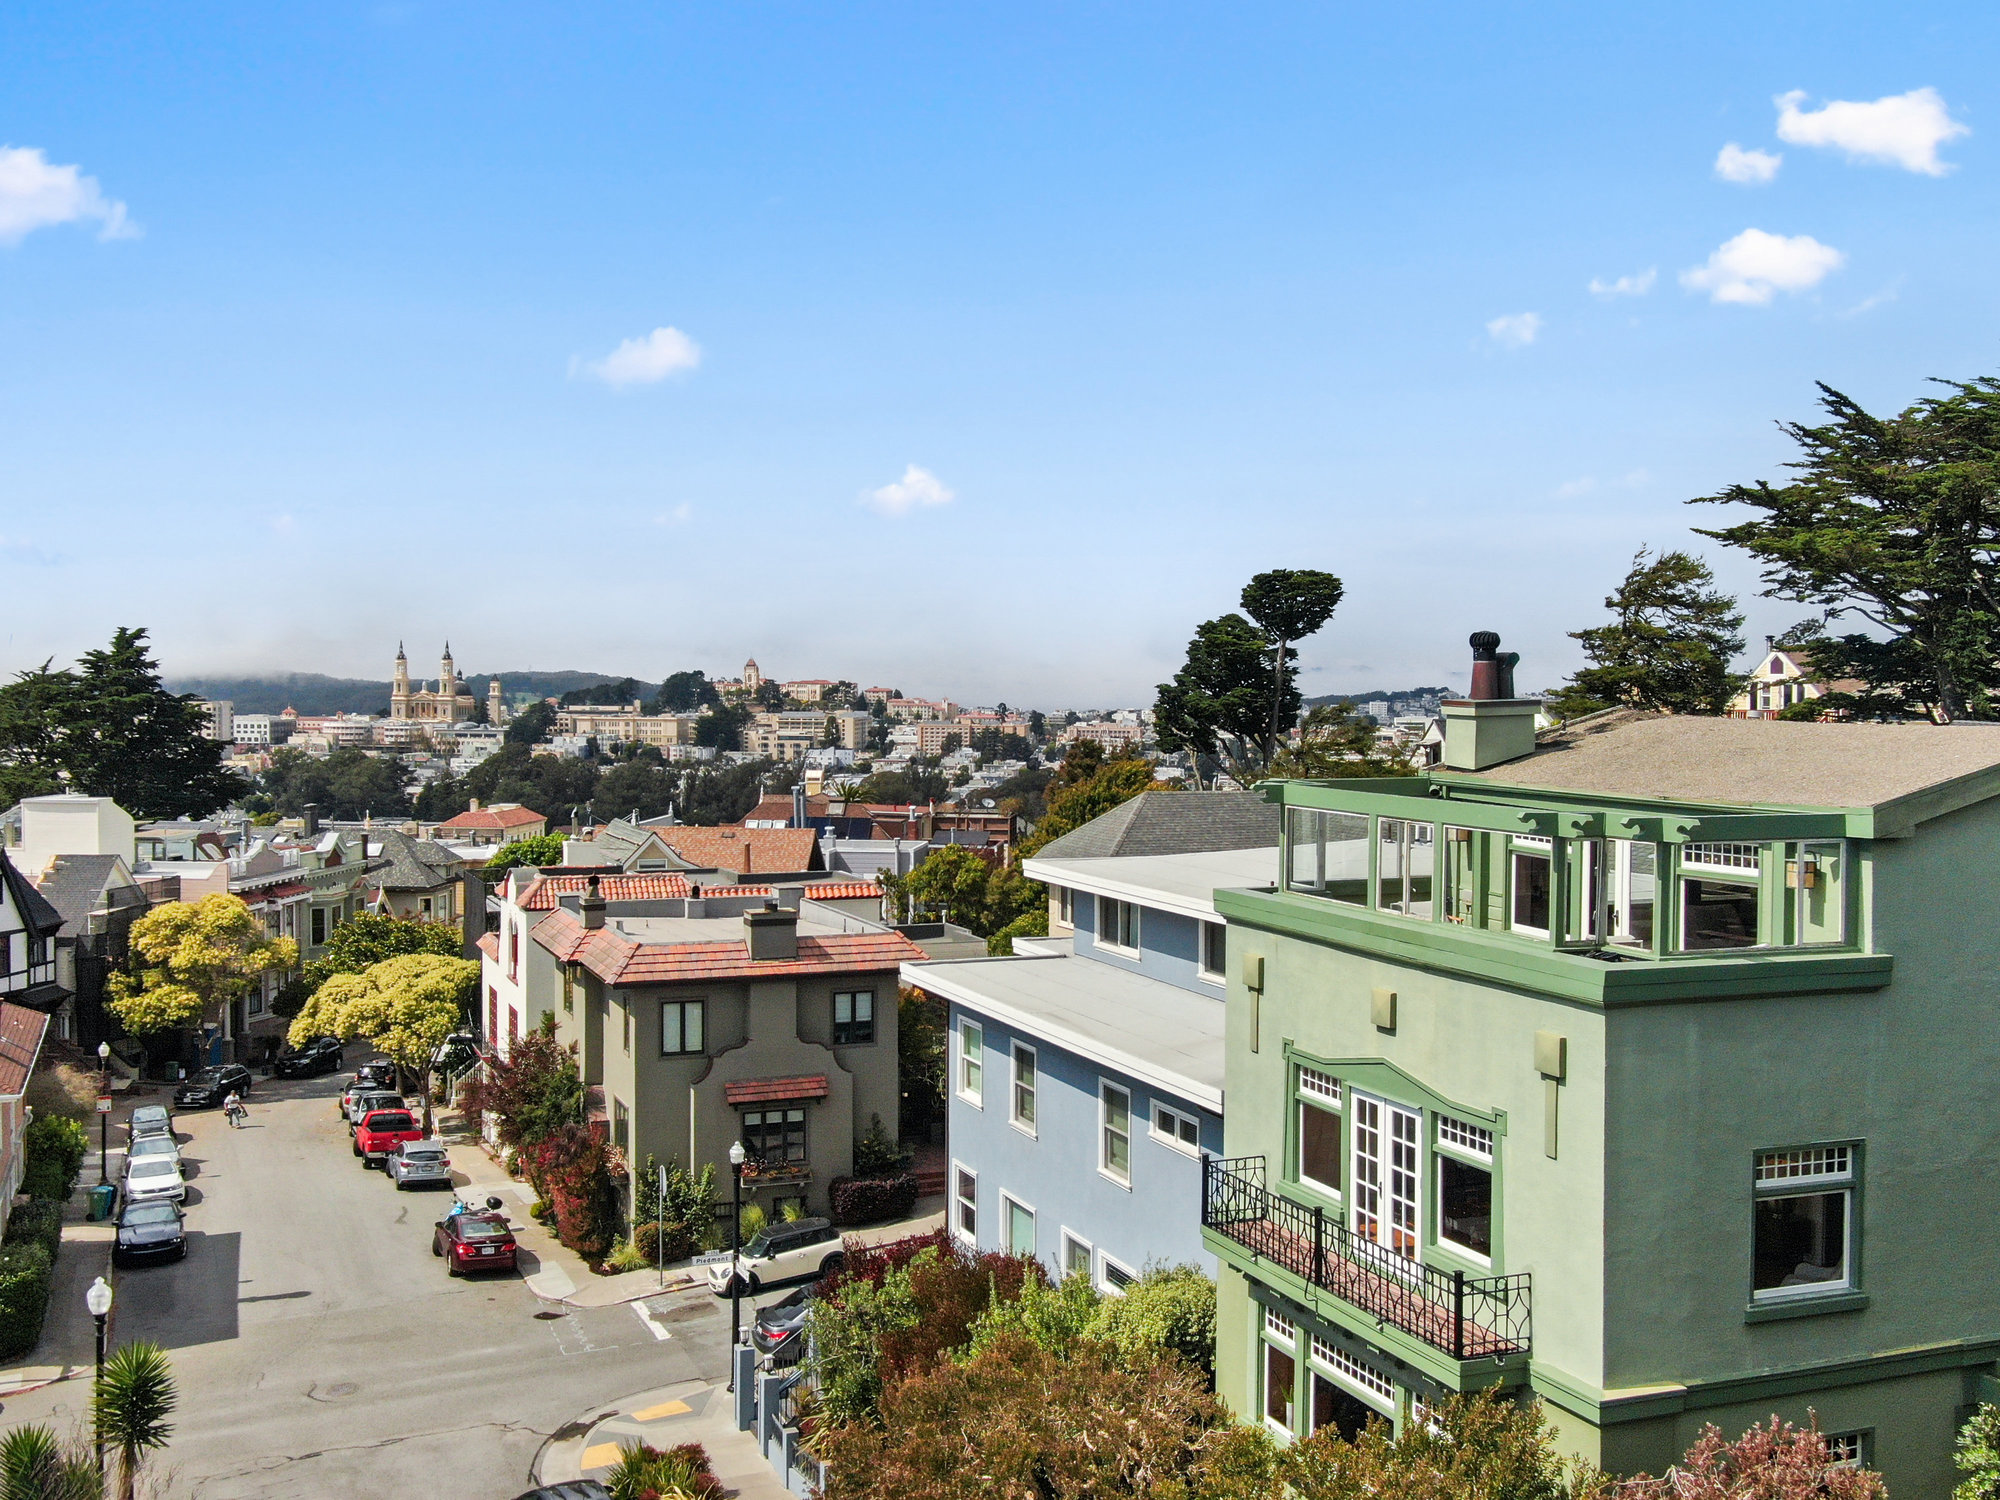 Property Photo: Street view of 4 Ashbury Terrace, showing the large homes lining the streets in the Ashbury Heights neighborhood